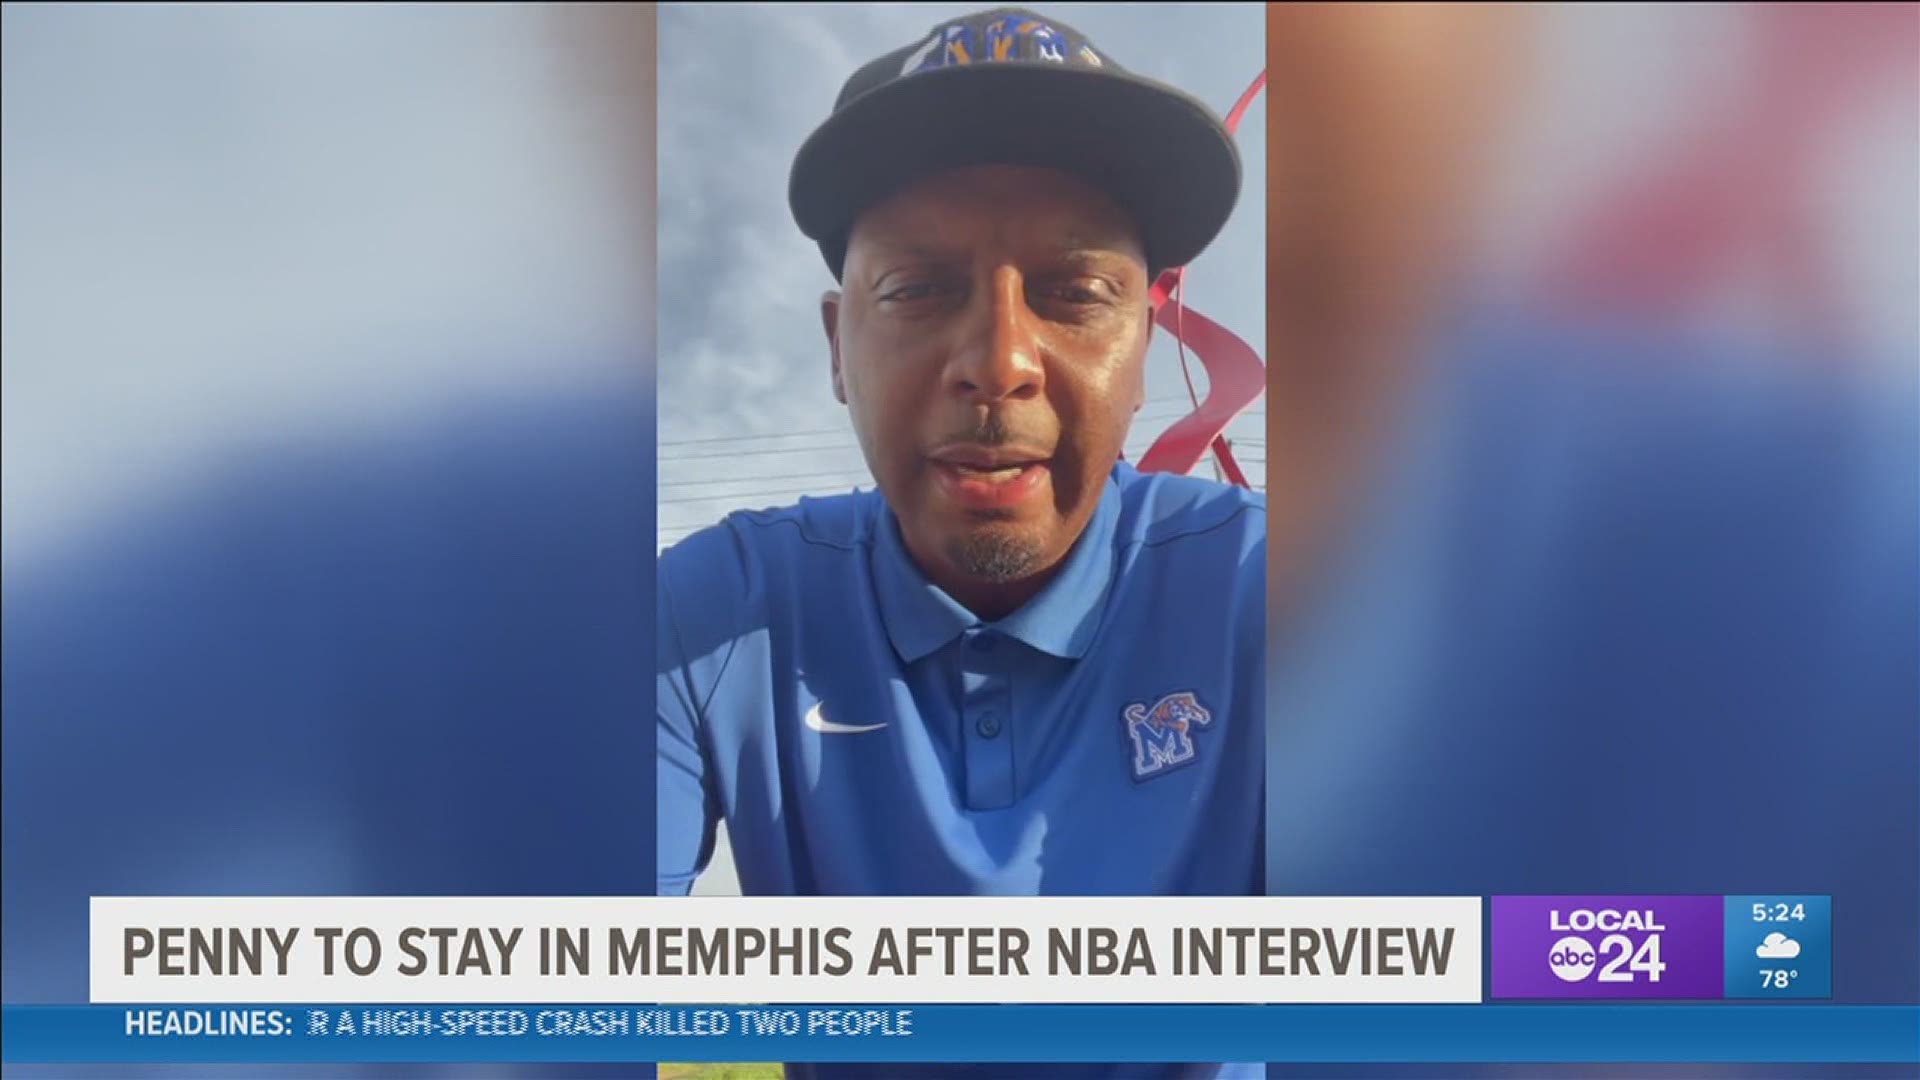 Local 24 News political analyst and commentator Otis Sanford shares his point of view on Coach Penny staying in Memphis.